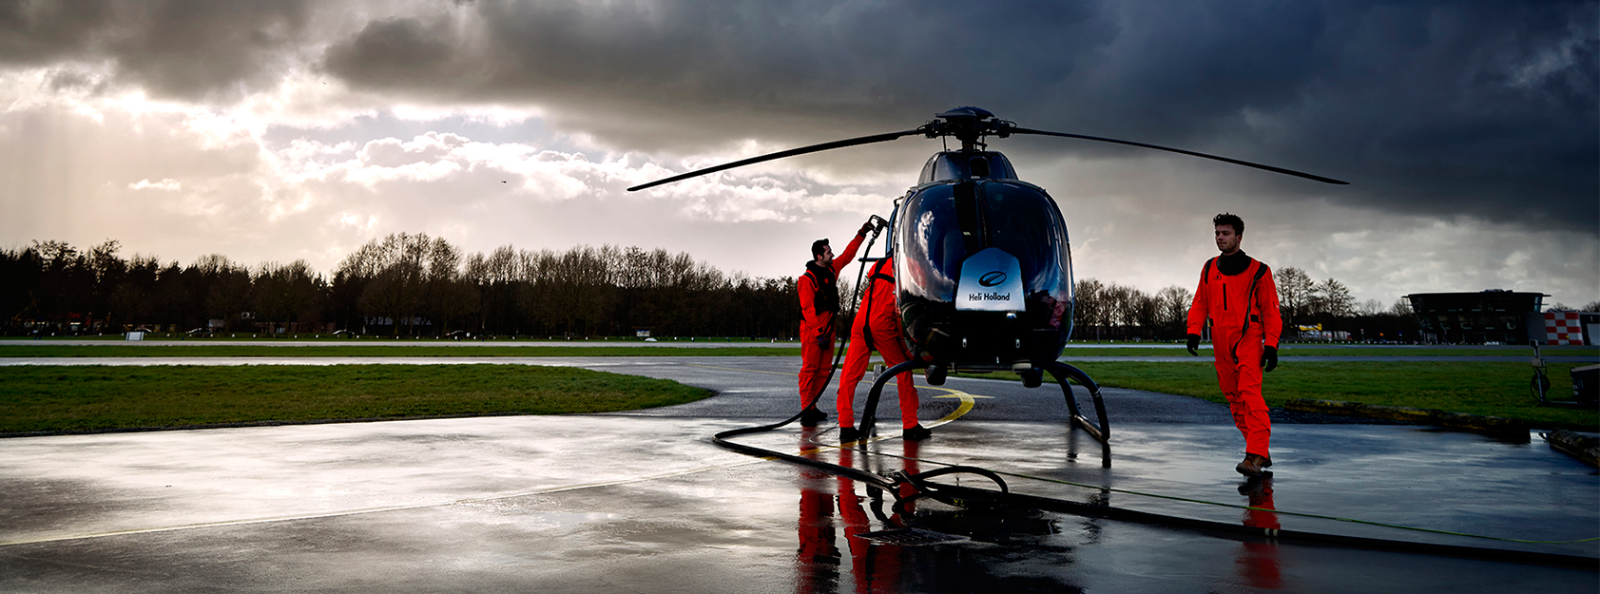 Helicopter maintenance and repair